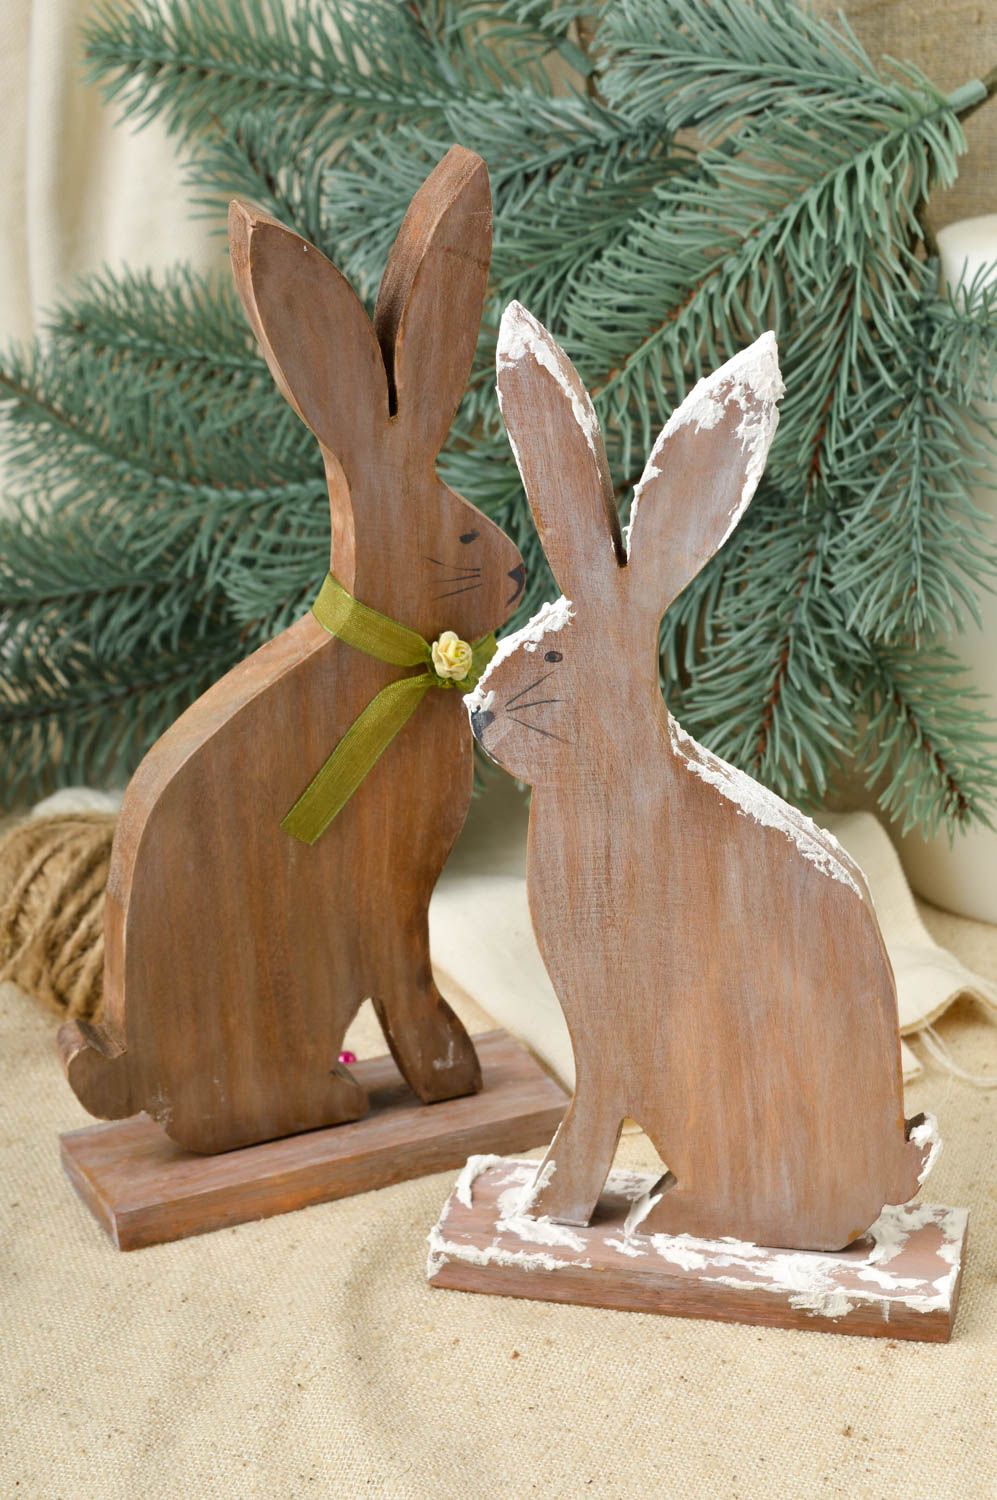 Handmade wooden figurines Christmas decor wooden toys for decorative use only photo 1